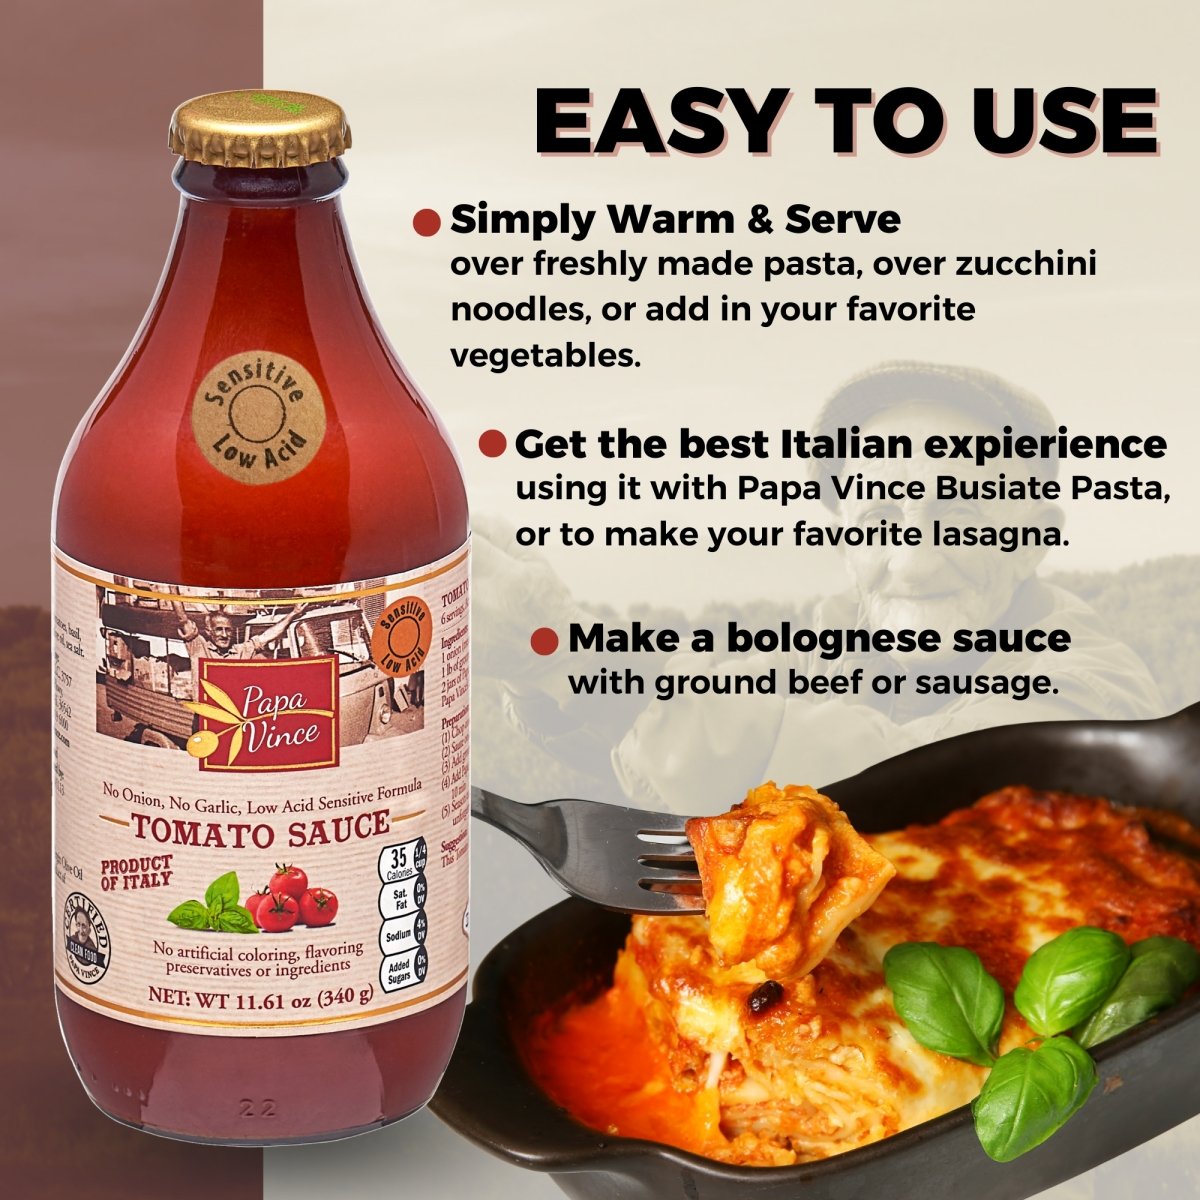 Papa Vince Pasta Tomato Sauce - Glass Canned, Clean Food, No Sugar Added, Low Acid for sensitive stomach | from Sicily, Italy, made with vine-ripened tomatoes handpicked at the peak of freshness to ensure exceptional taste 11.6 oz - Papa Vince